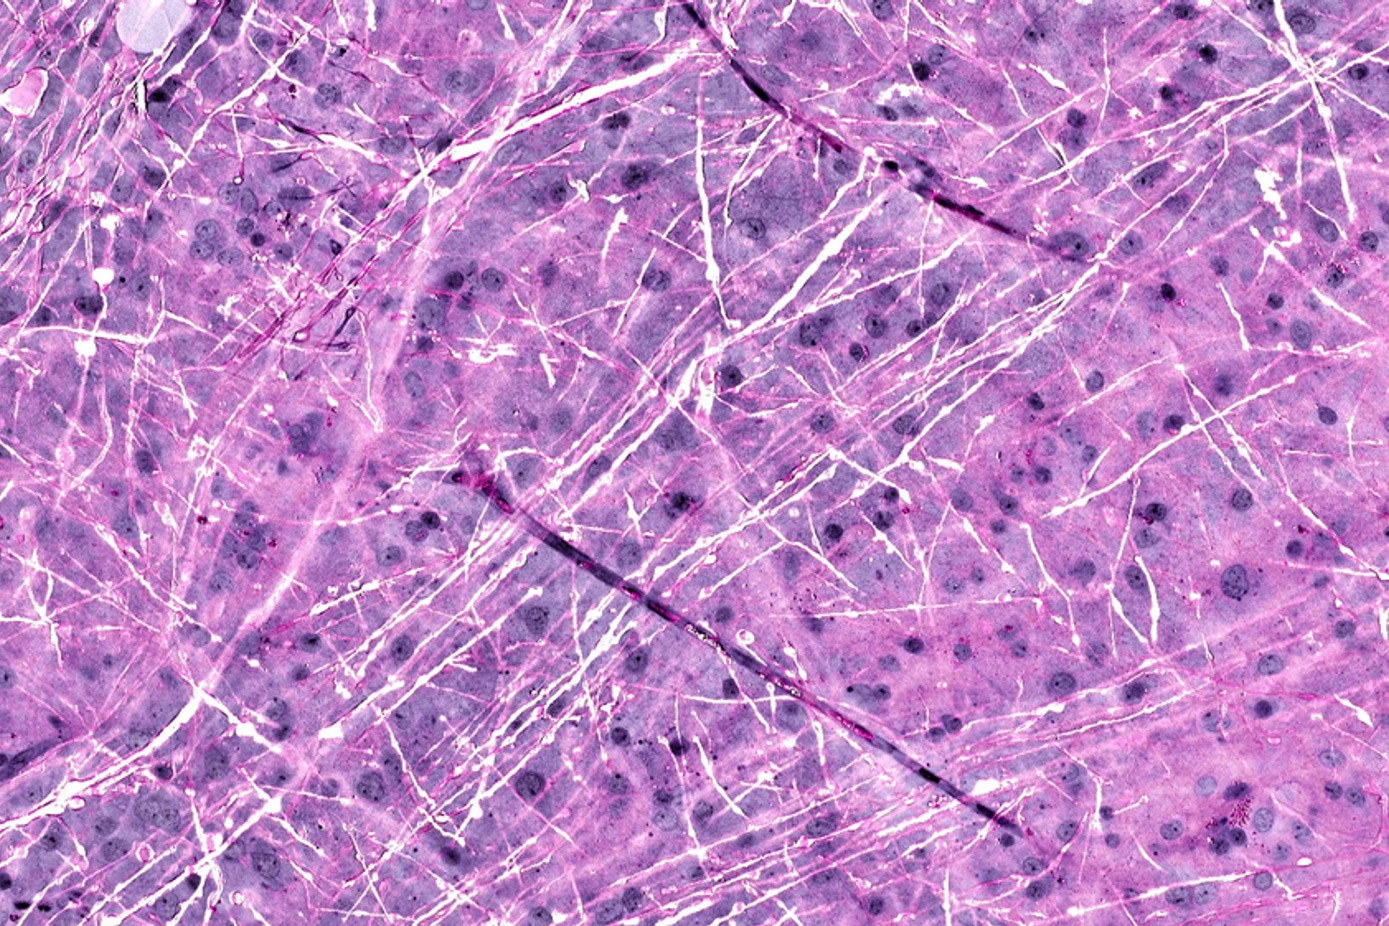 A histology image from the Invenio website